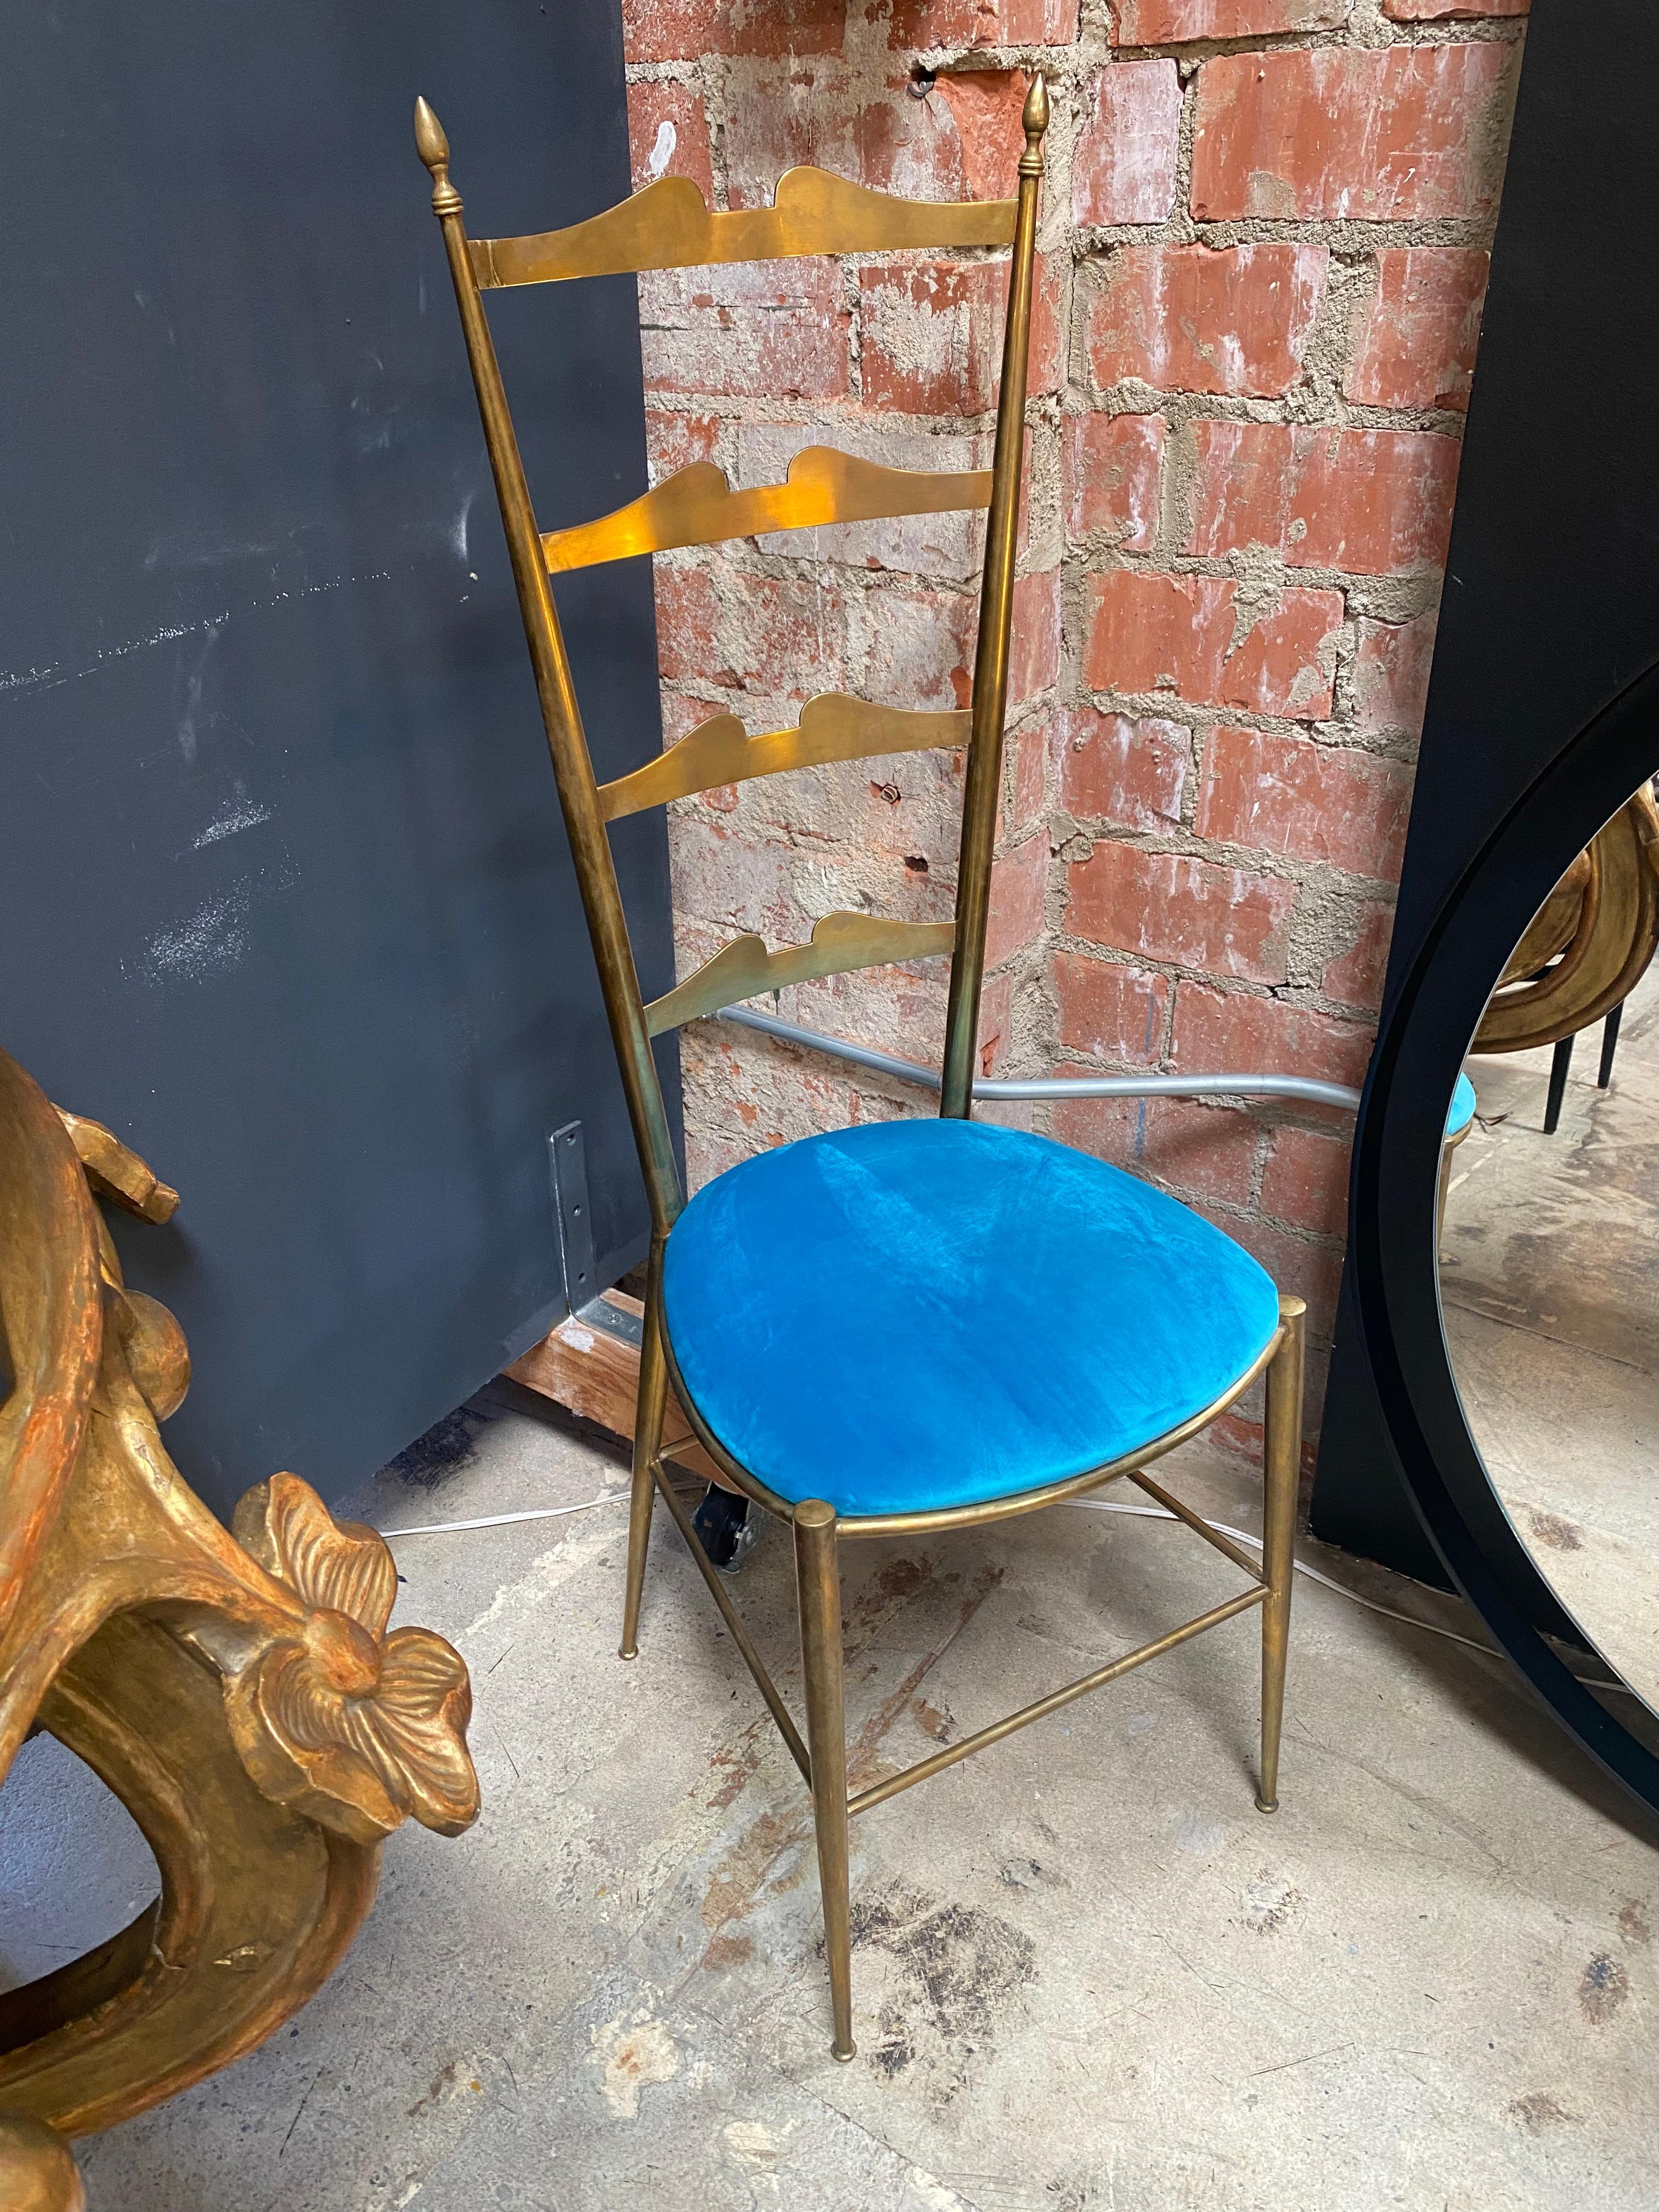 This extraordinary mid-century Italian brass and blue suede dining room chairs is made out of fully brass base and blue suede fabric.
It is in beautiful untouched original condition and I bought it out of a house in Italy. The chairs are